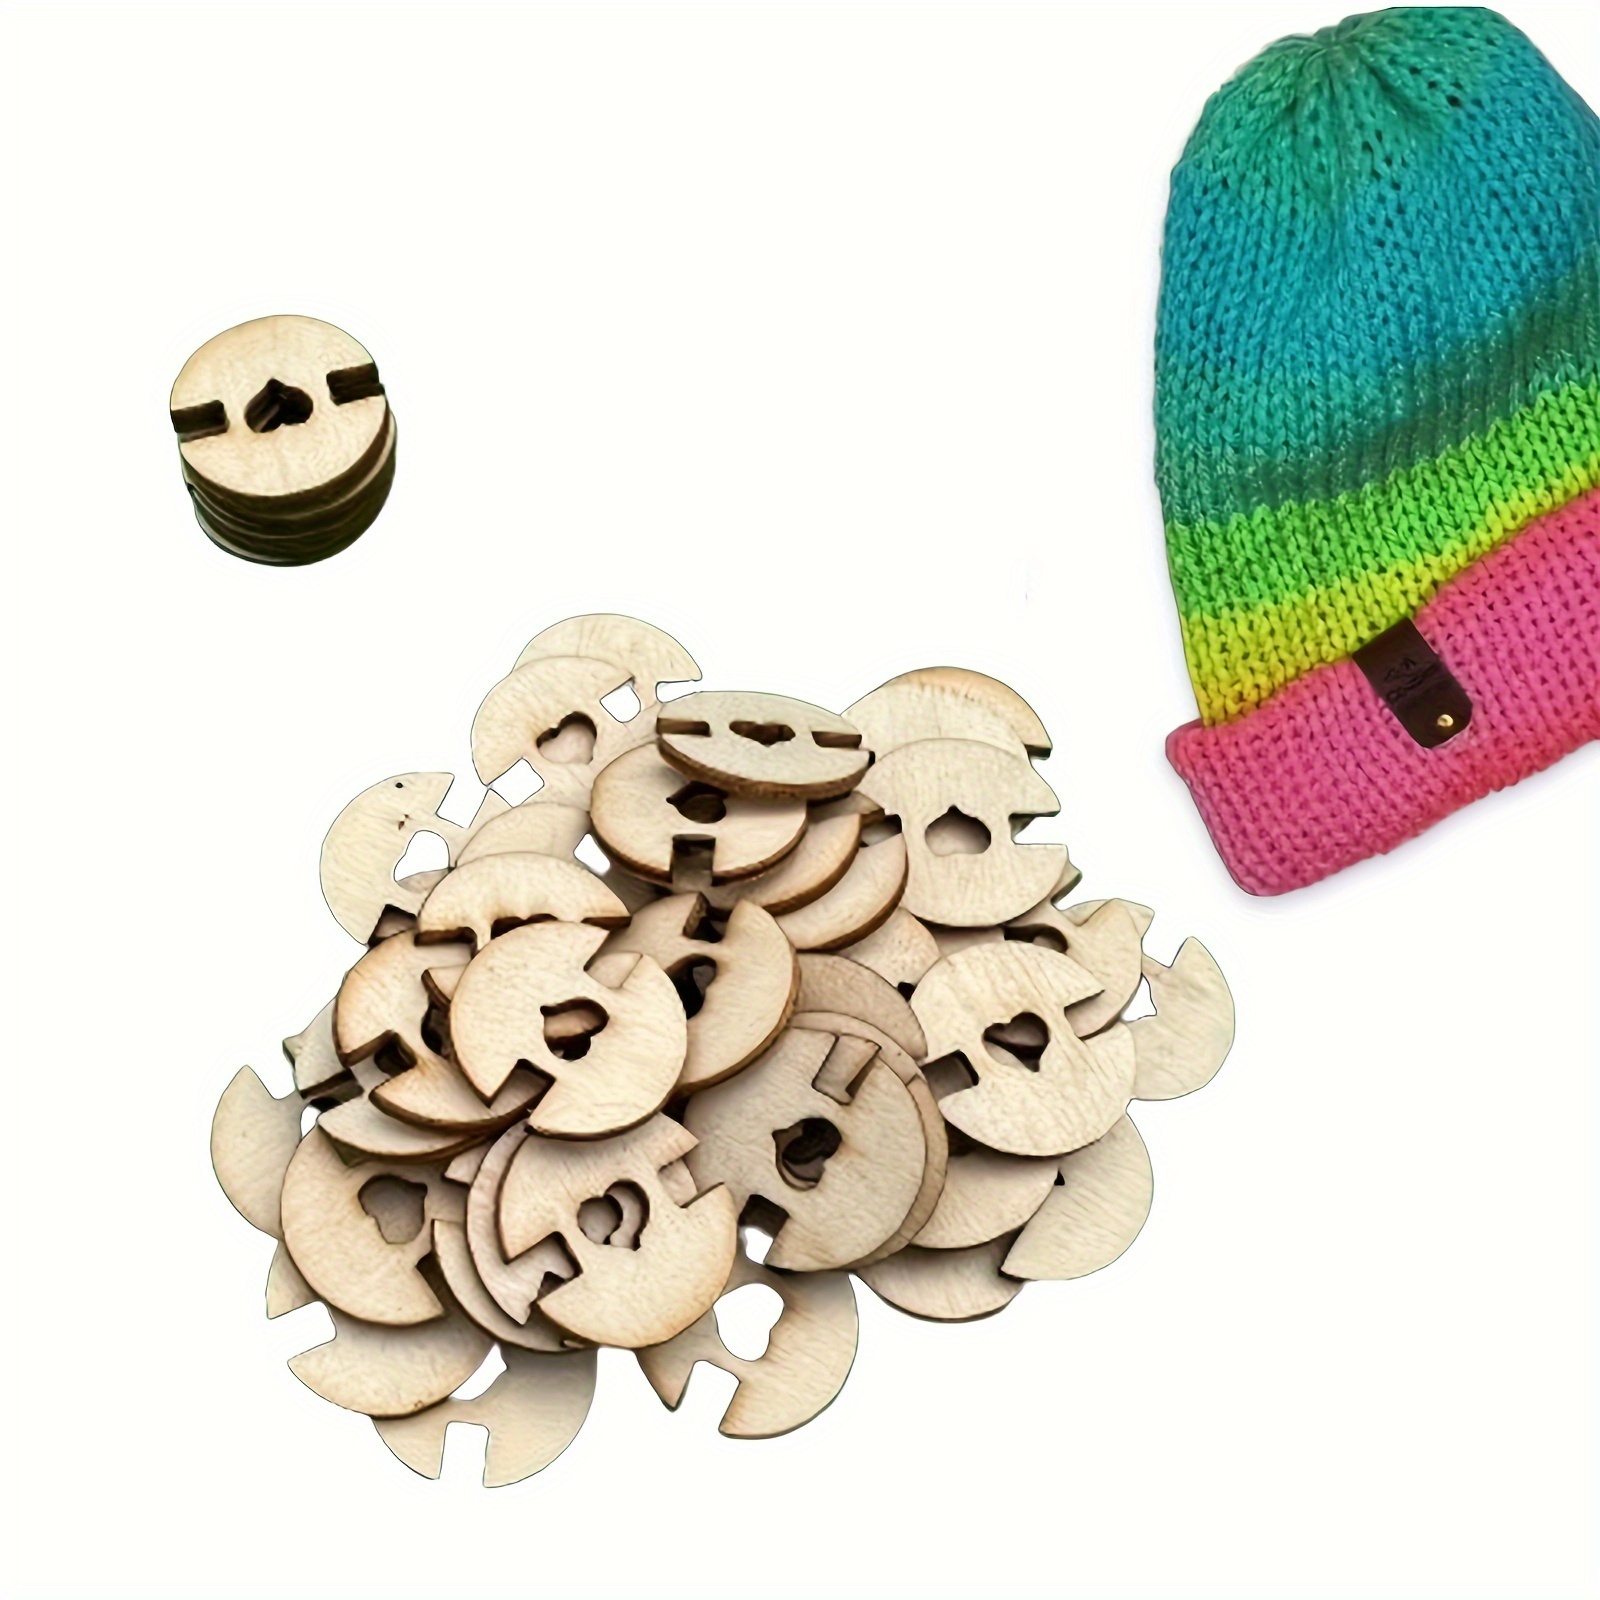 

50-piece Wooden/acrylic Pom Pom Buttons For Beanies - Removable Faux Fur Pom Poms, Knit Hat Fastener Tool & Holder